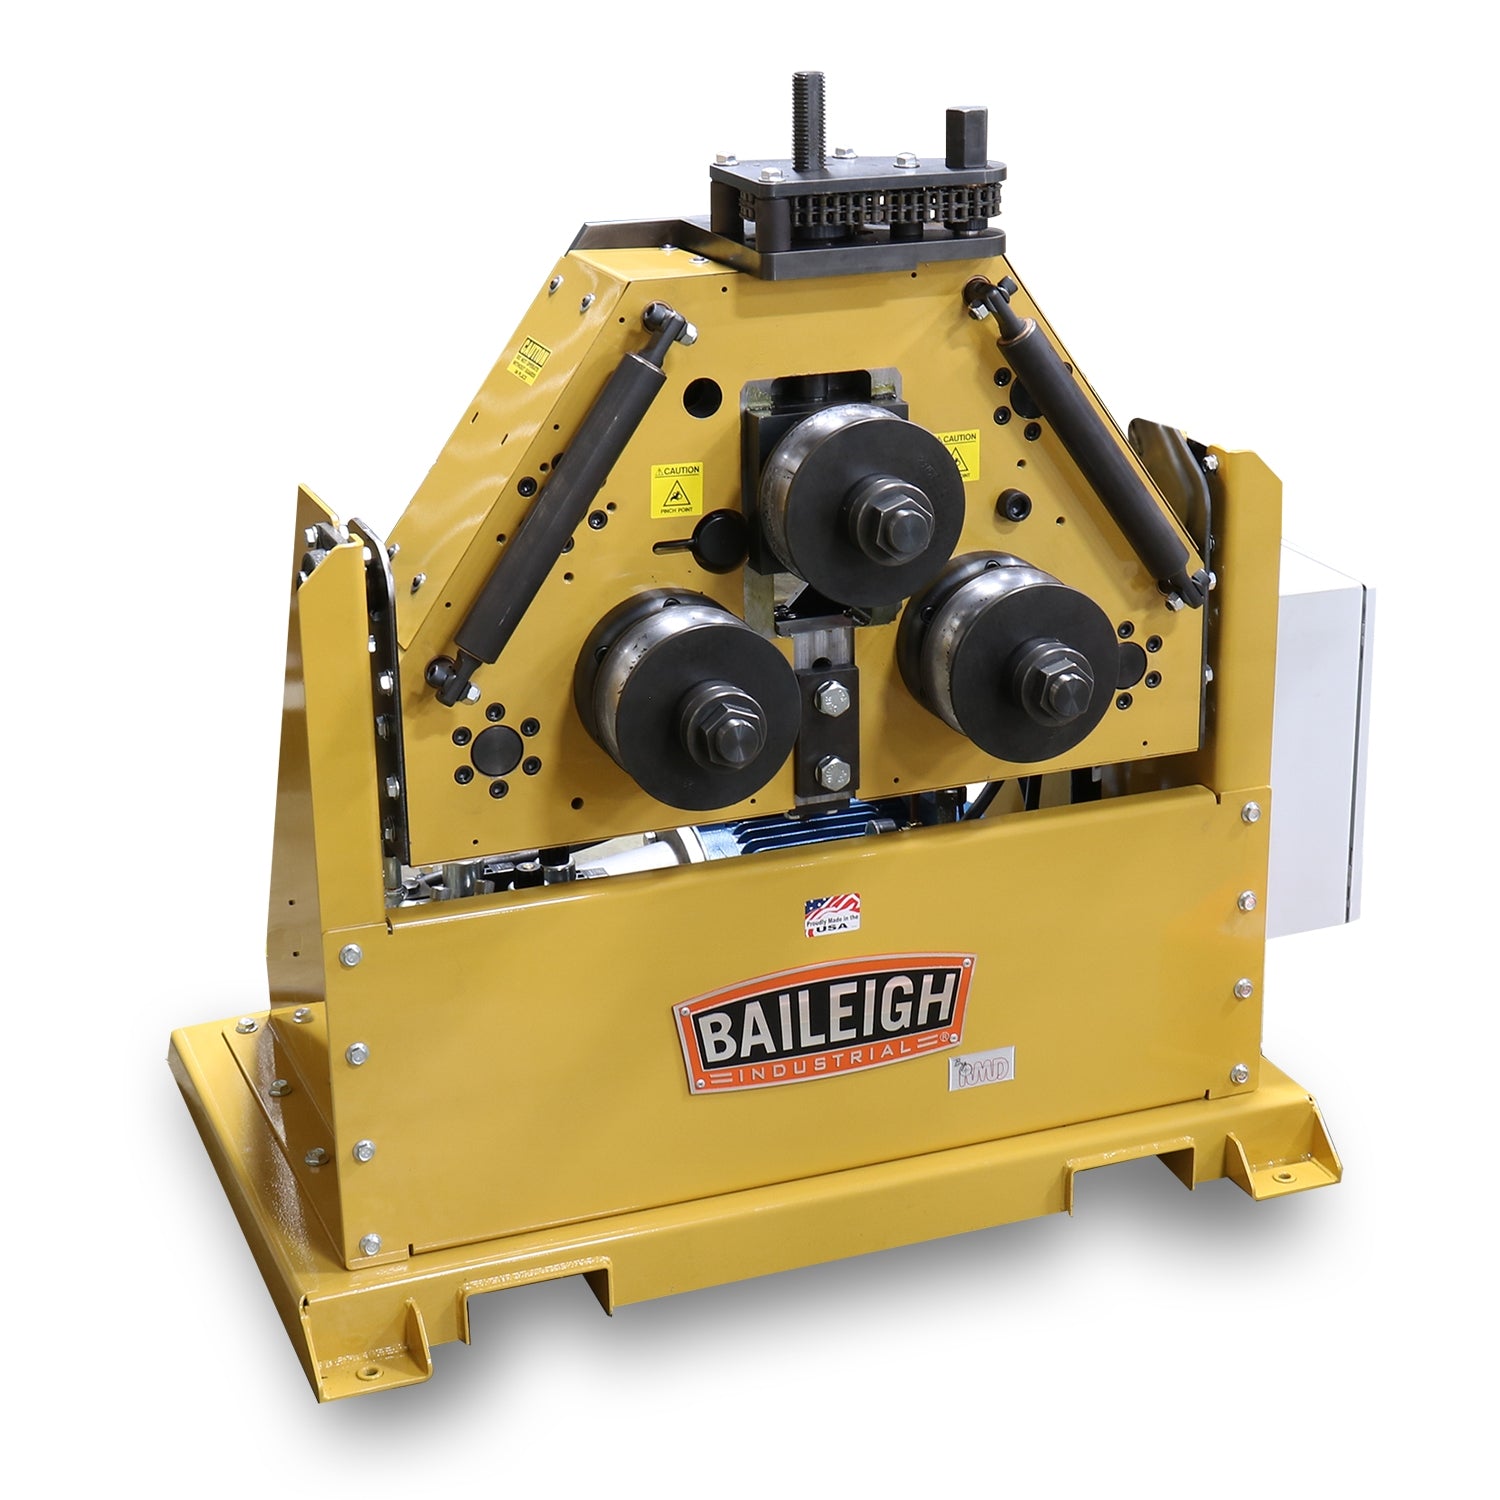 Baileigh R-M60-HD 220V 1 Phase Roll Bender with Hydraulic Drive, Manual Top Roll and Tilt 2" Shedule 40 Capacity